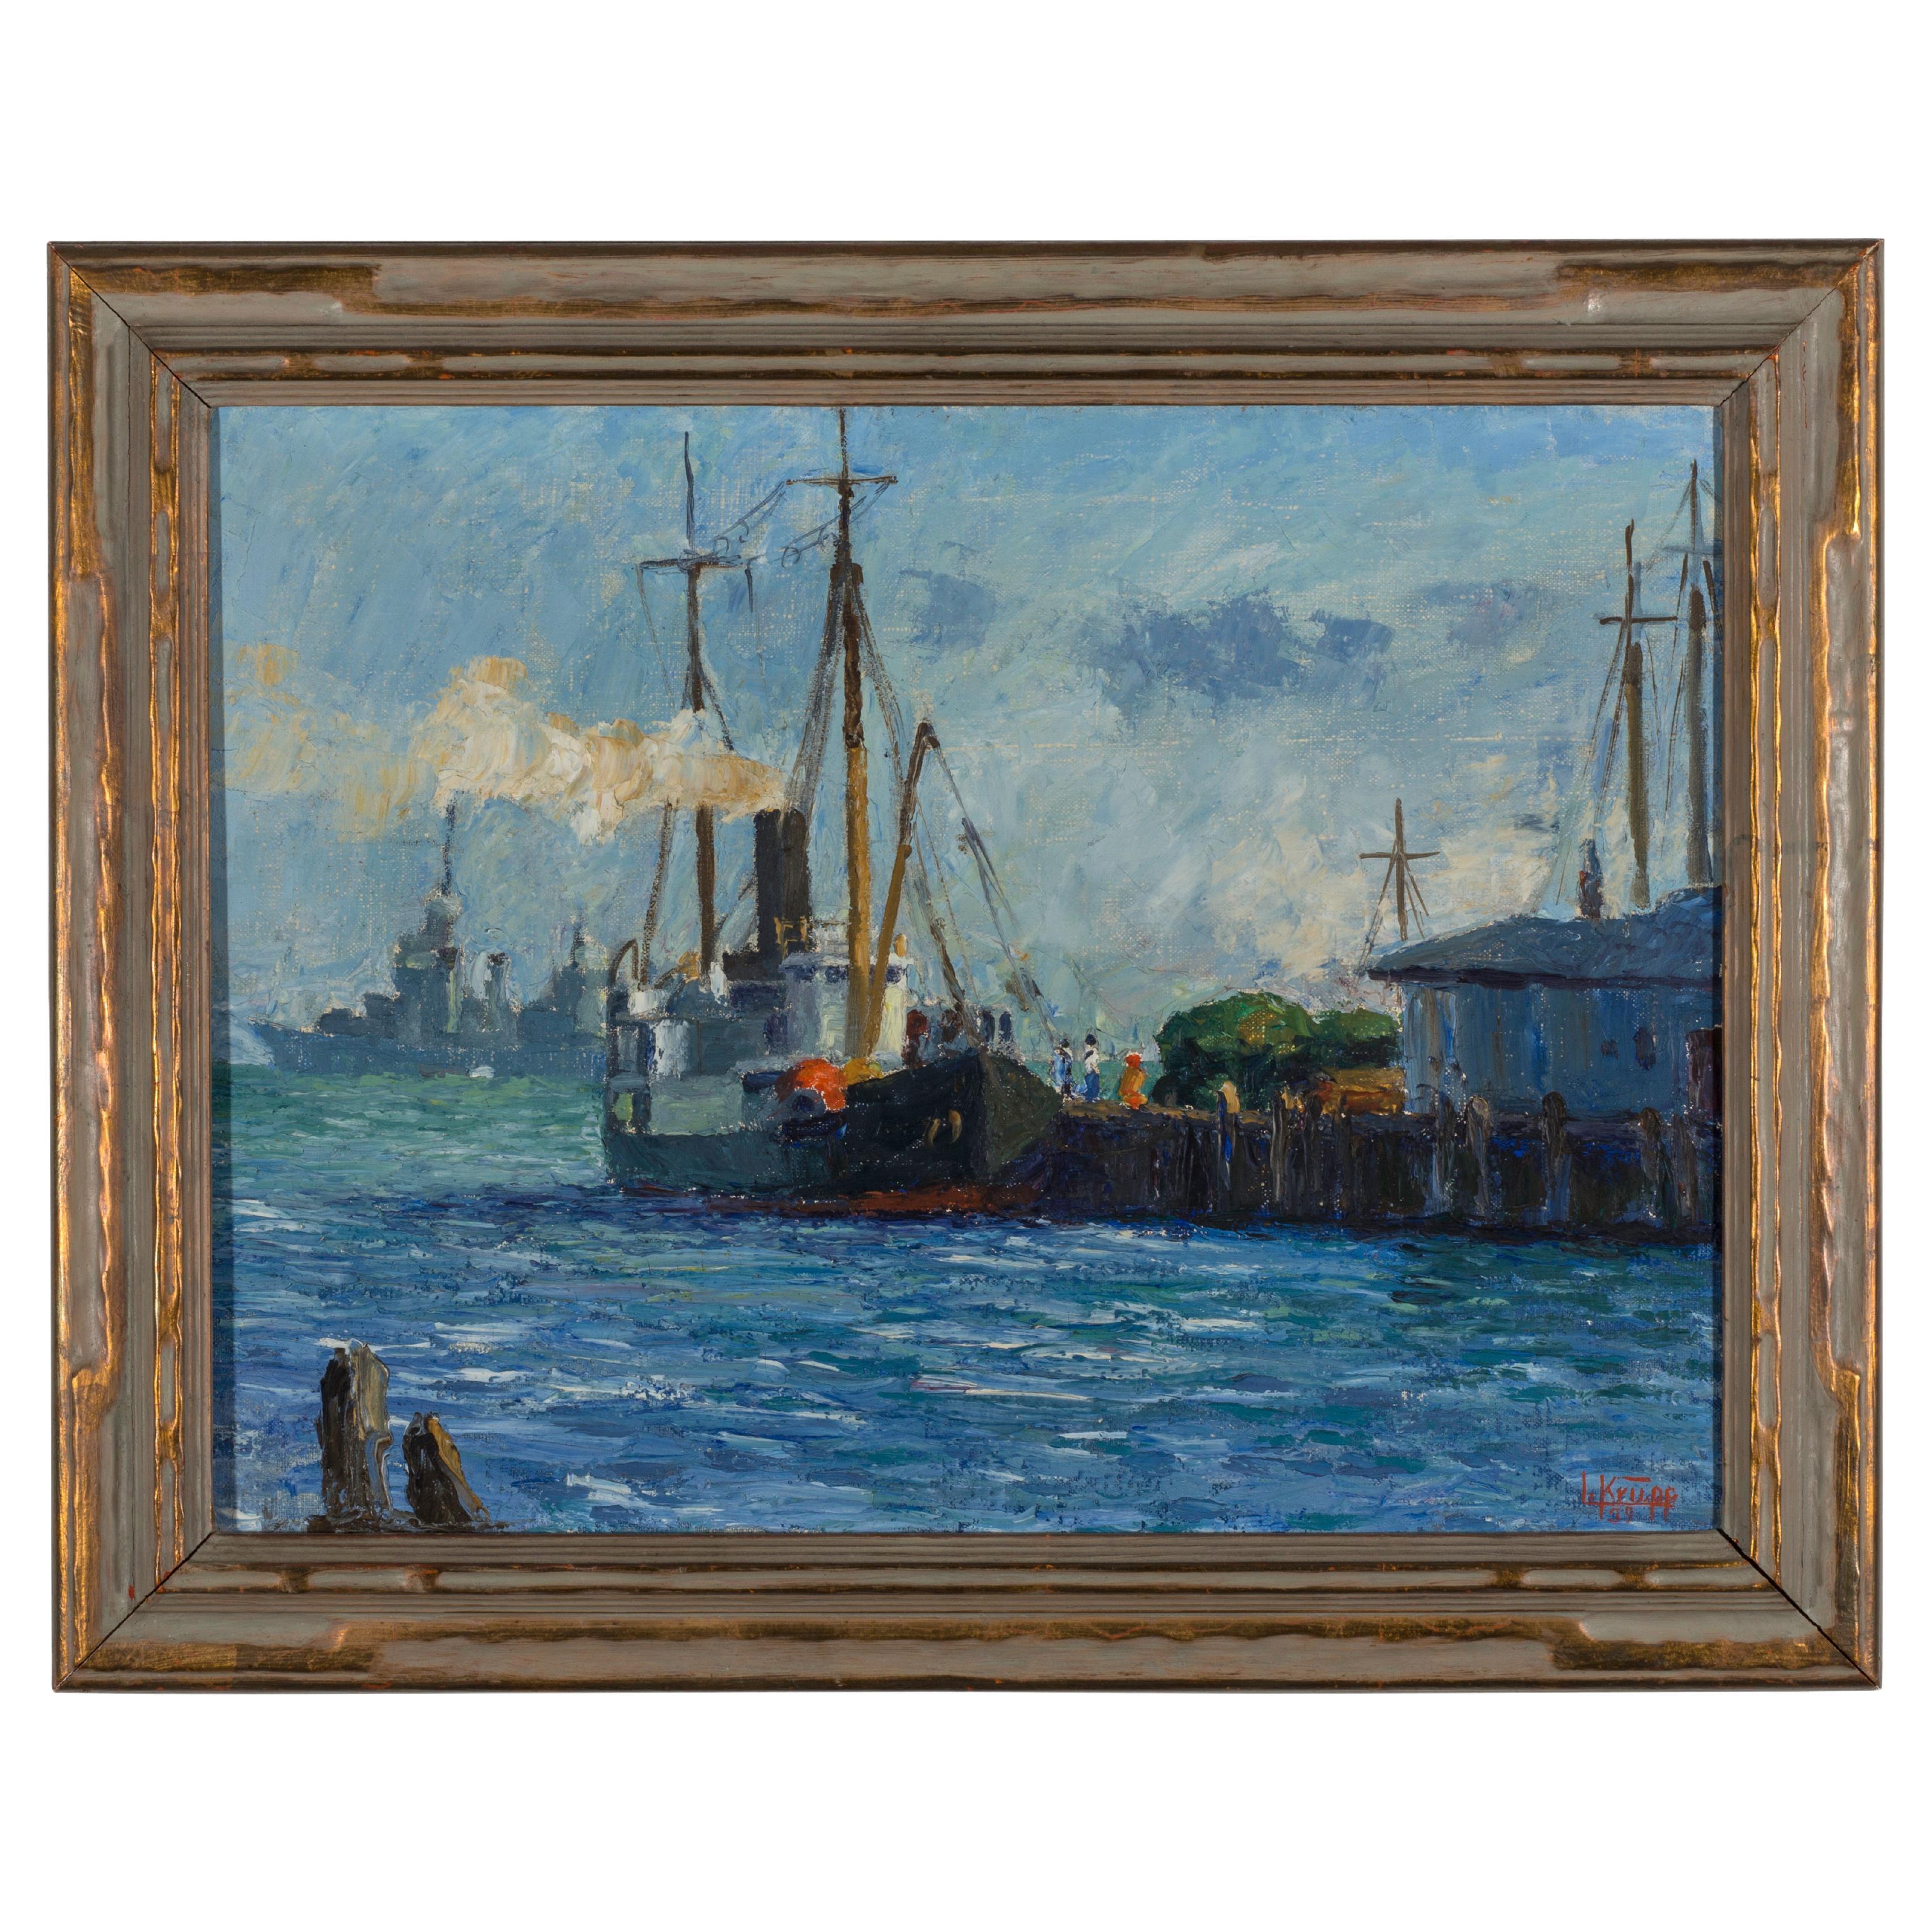 Painting by Louis Krupp “Harbor Ships”